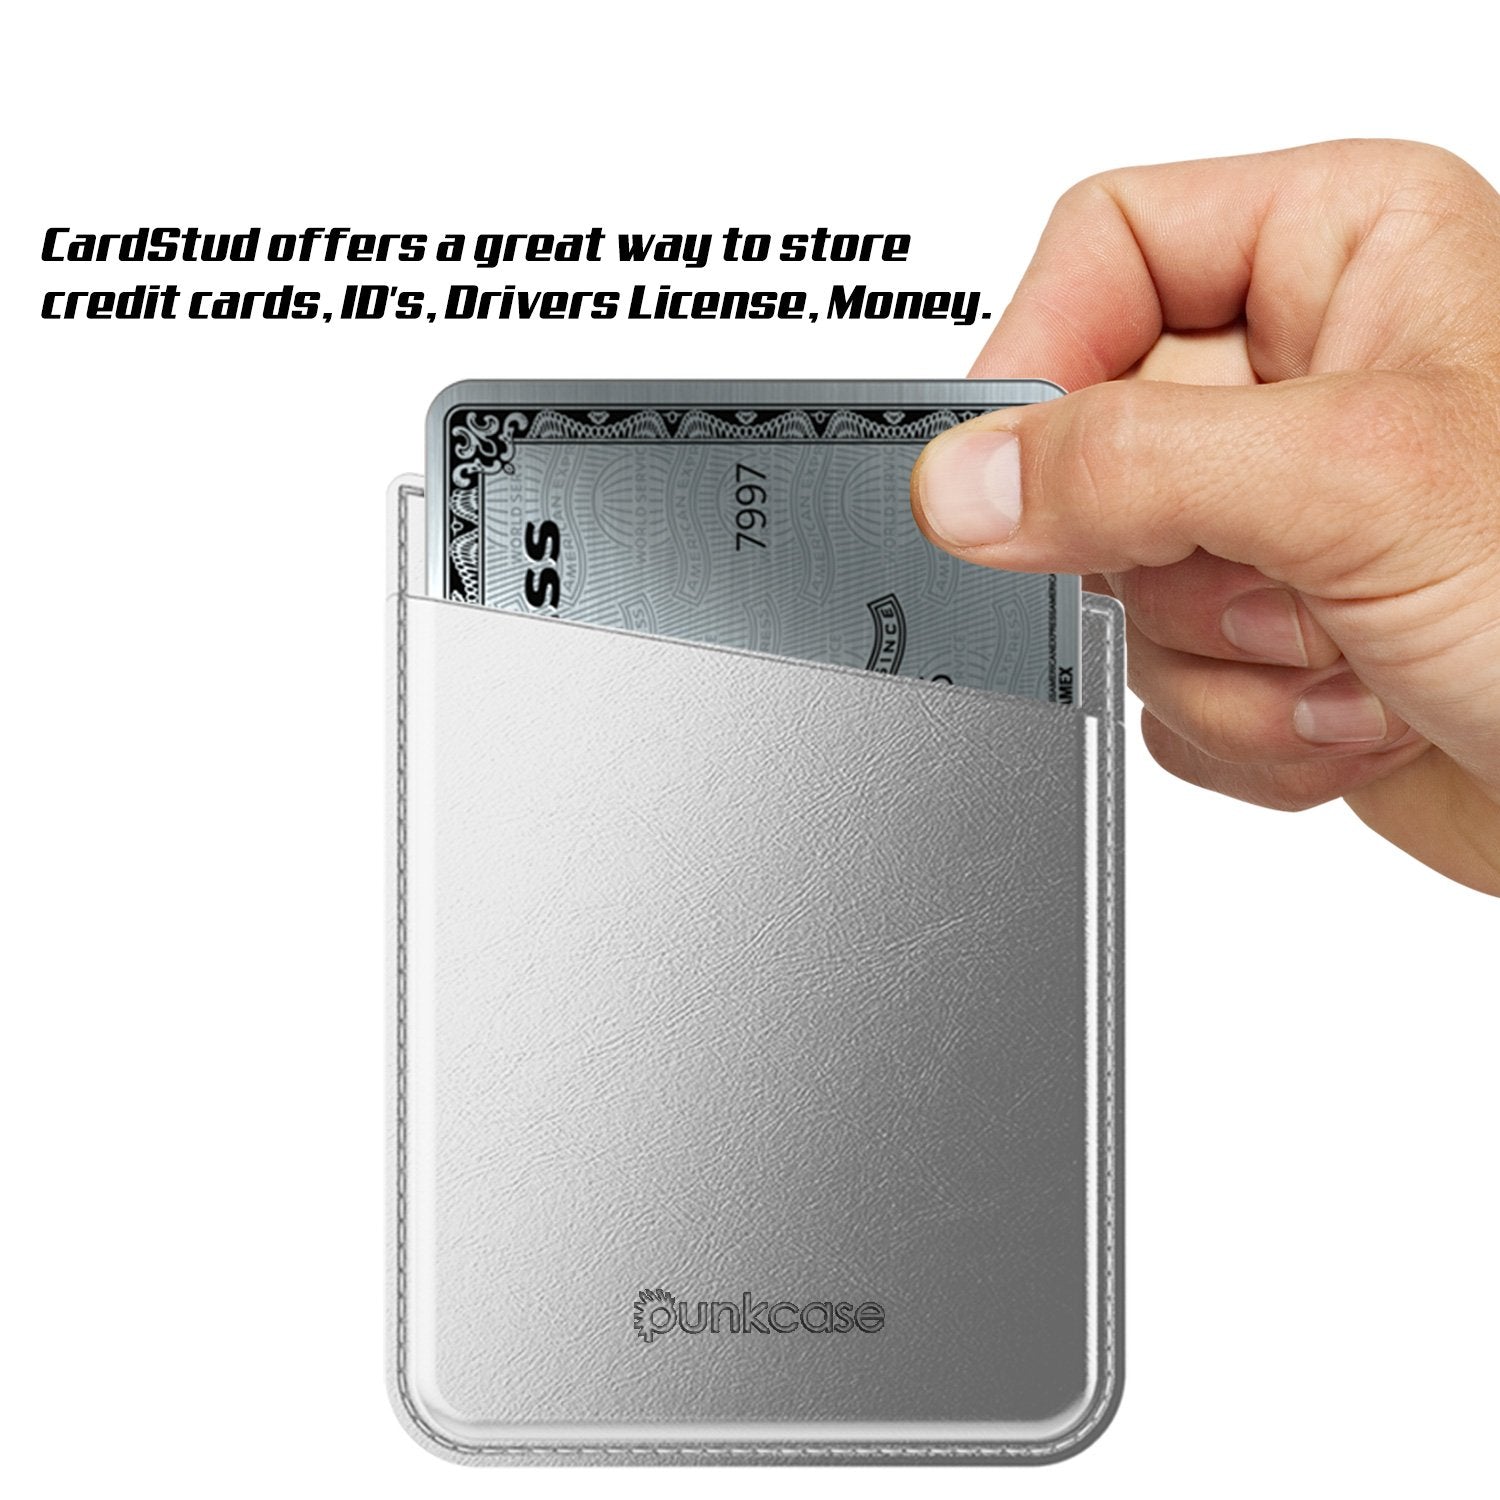 PunkCase CardStud Deluxe Stick On Wallet | Adhesive Card Holder Attachment for Back of iPhone, Android & More | Leather Pouch | [Silver]